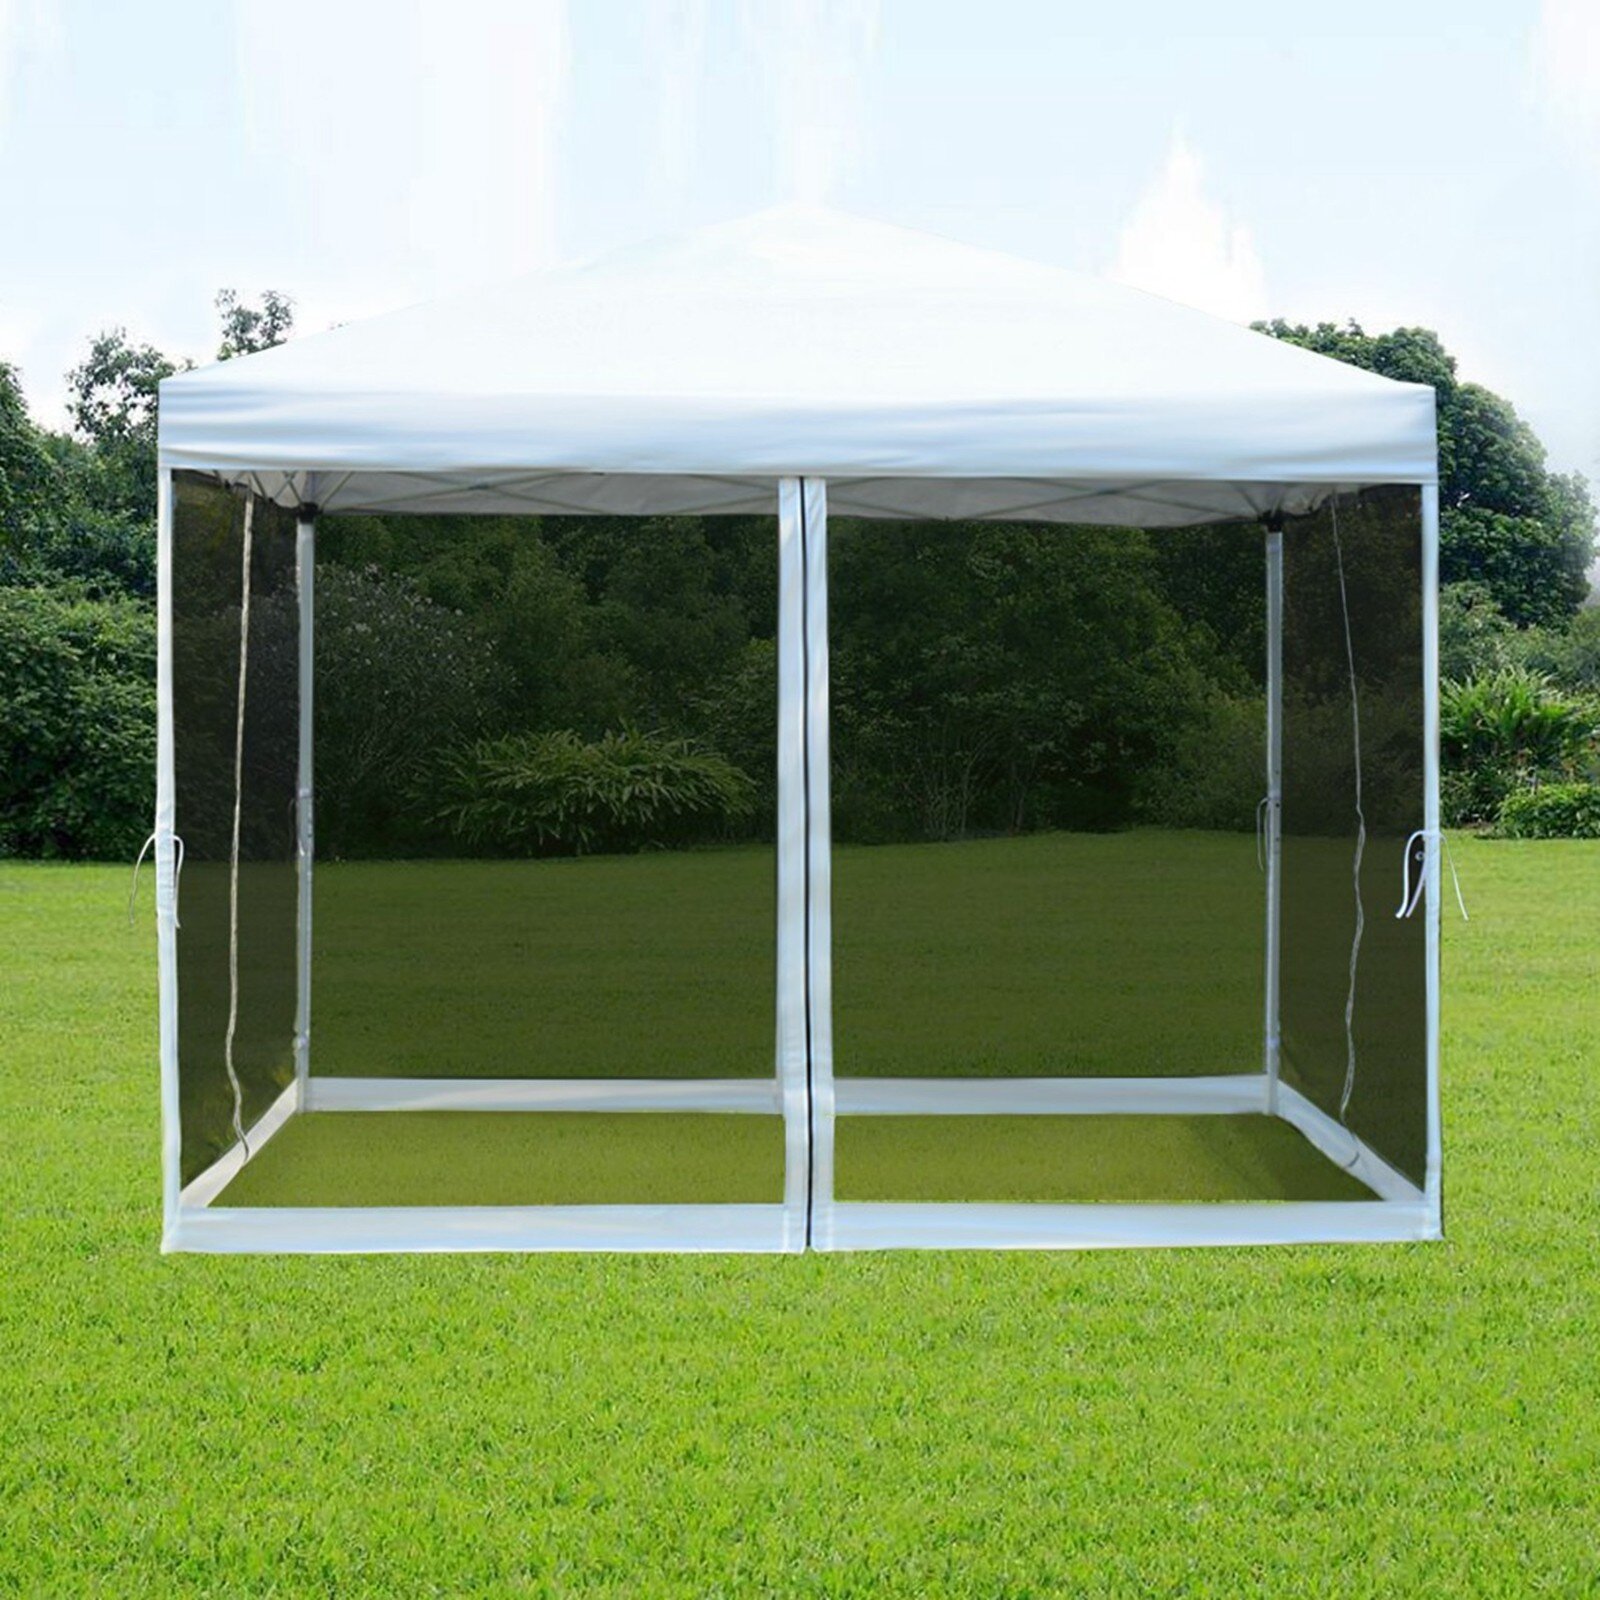 Patio Gazebo Canopy Mesh Waterproof Awning Outdoor Pops Up Wedding Party Tent 